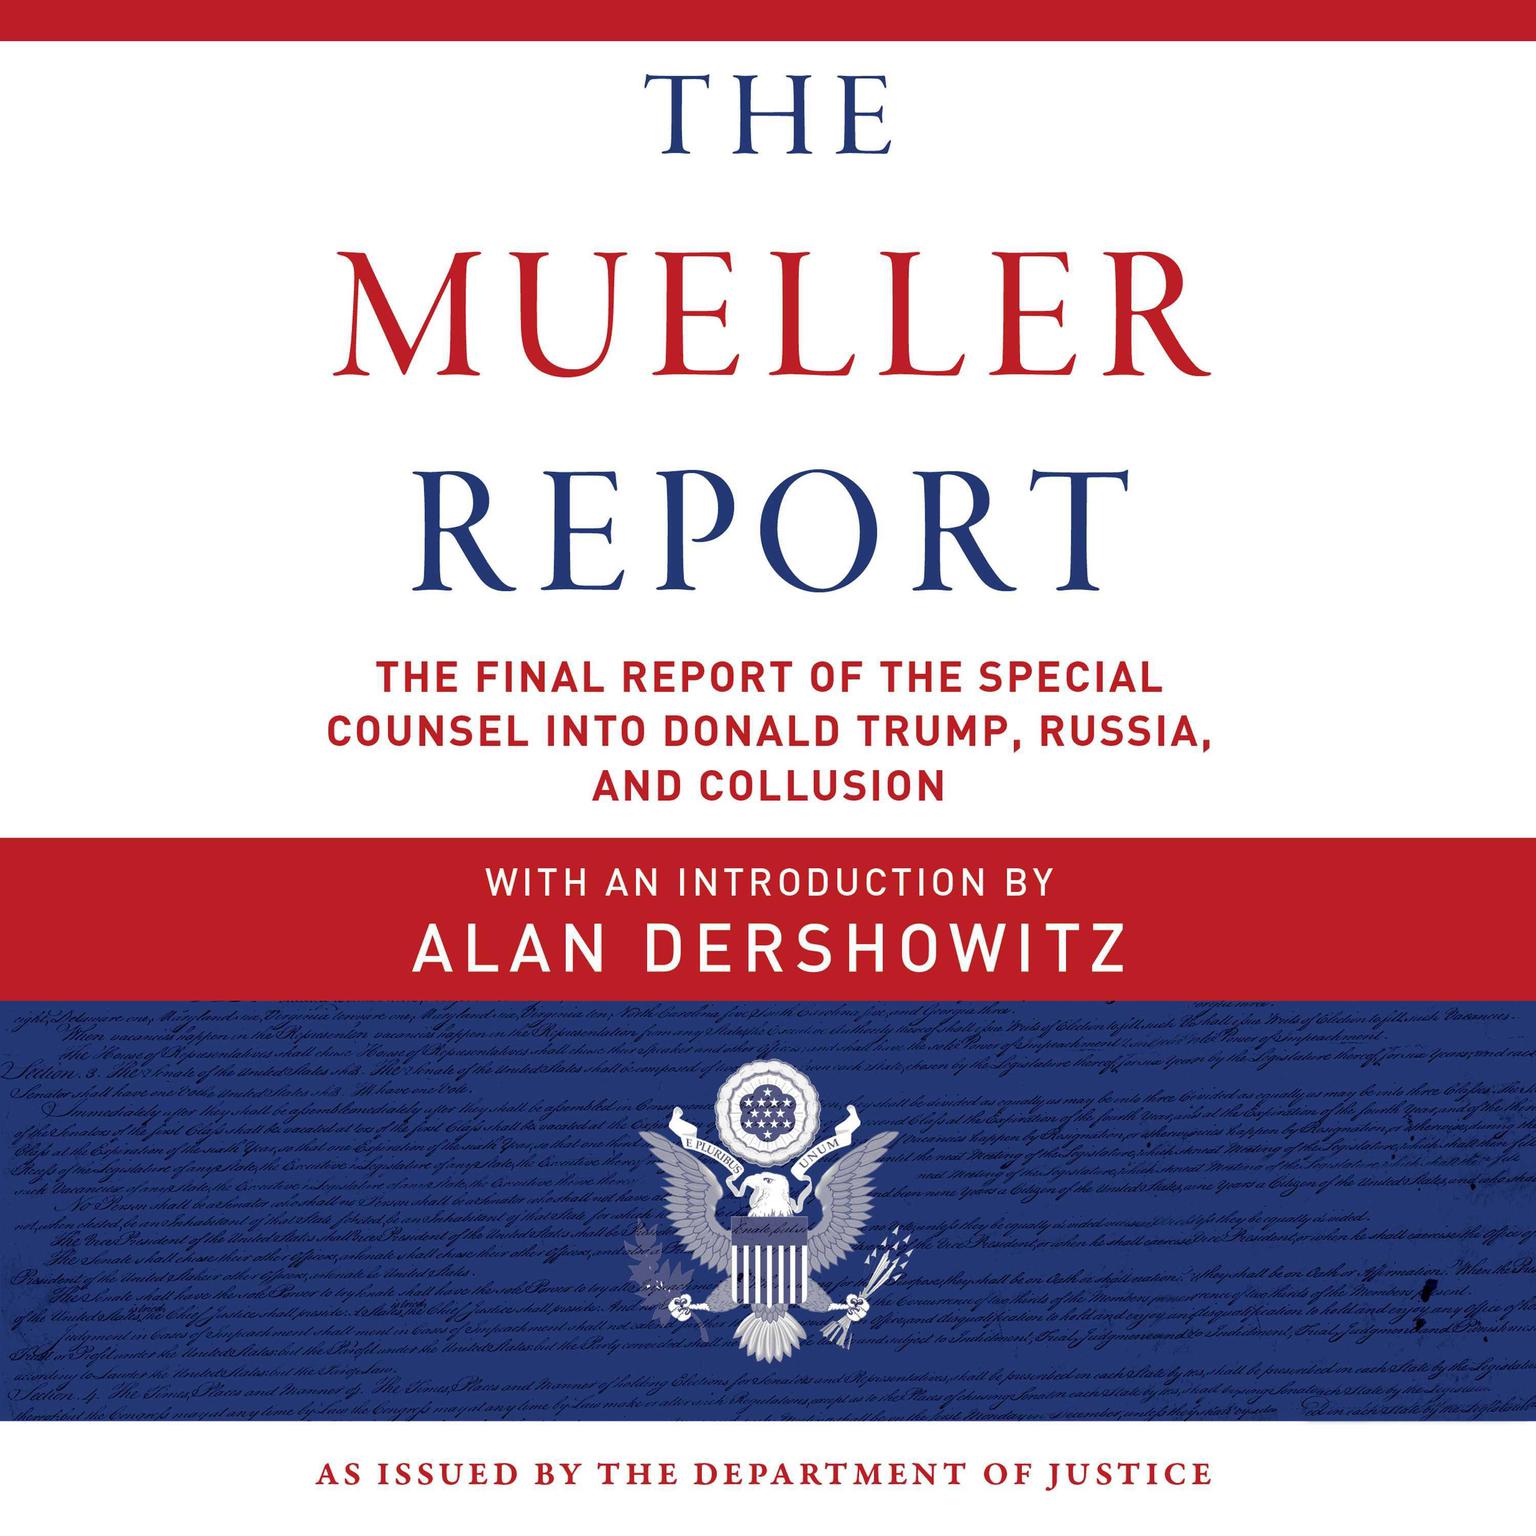 The Mueller Report: The Final Report of the Special Counsel into Donald Trump, Russia, and Collusion Audiobook, by Robert S. Mueller